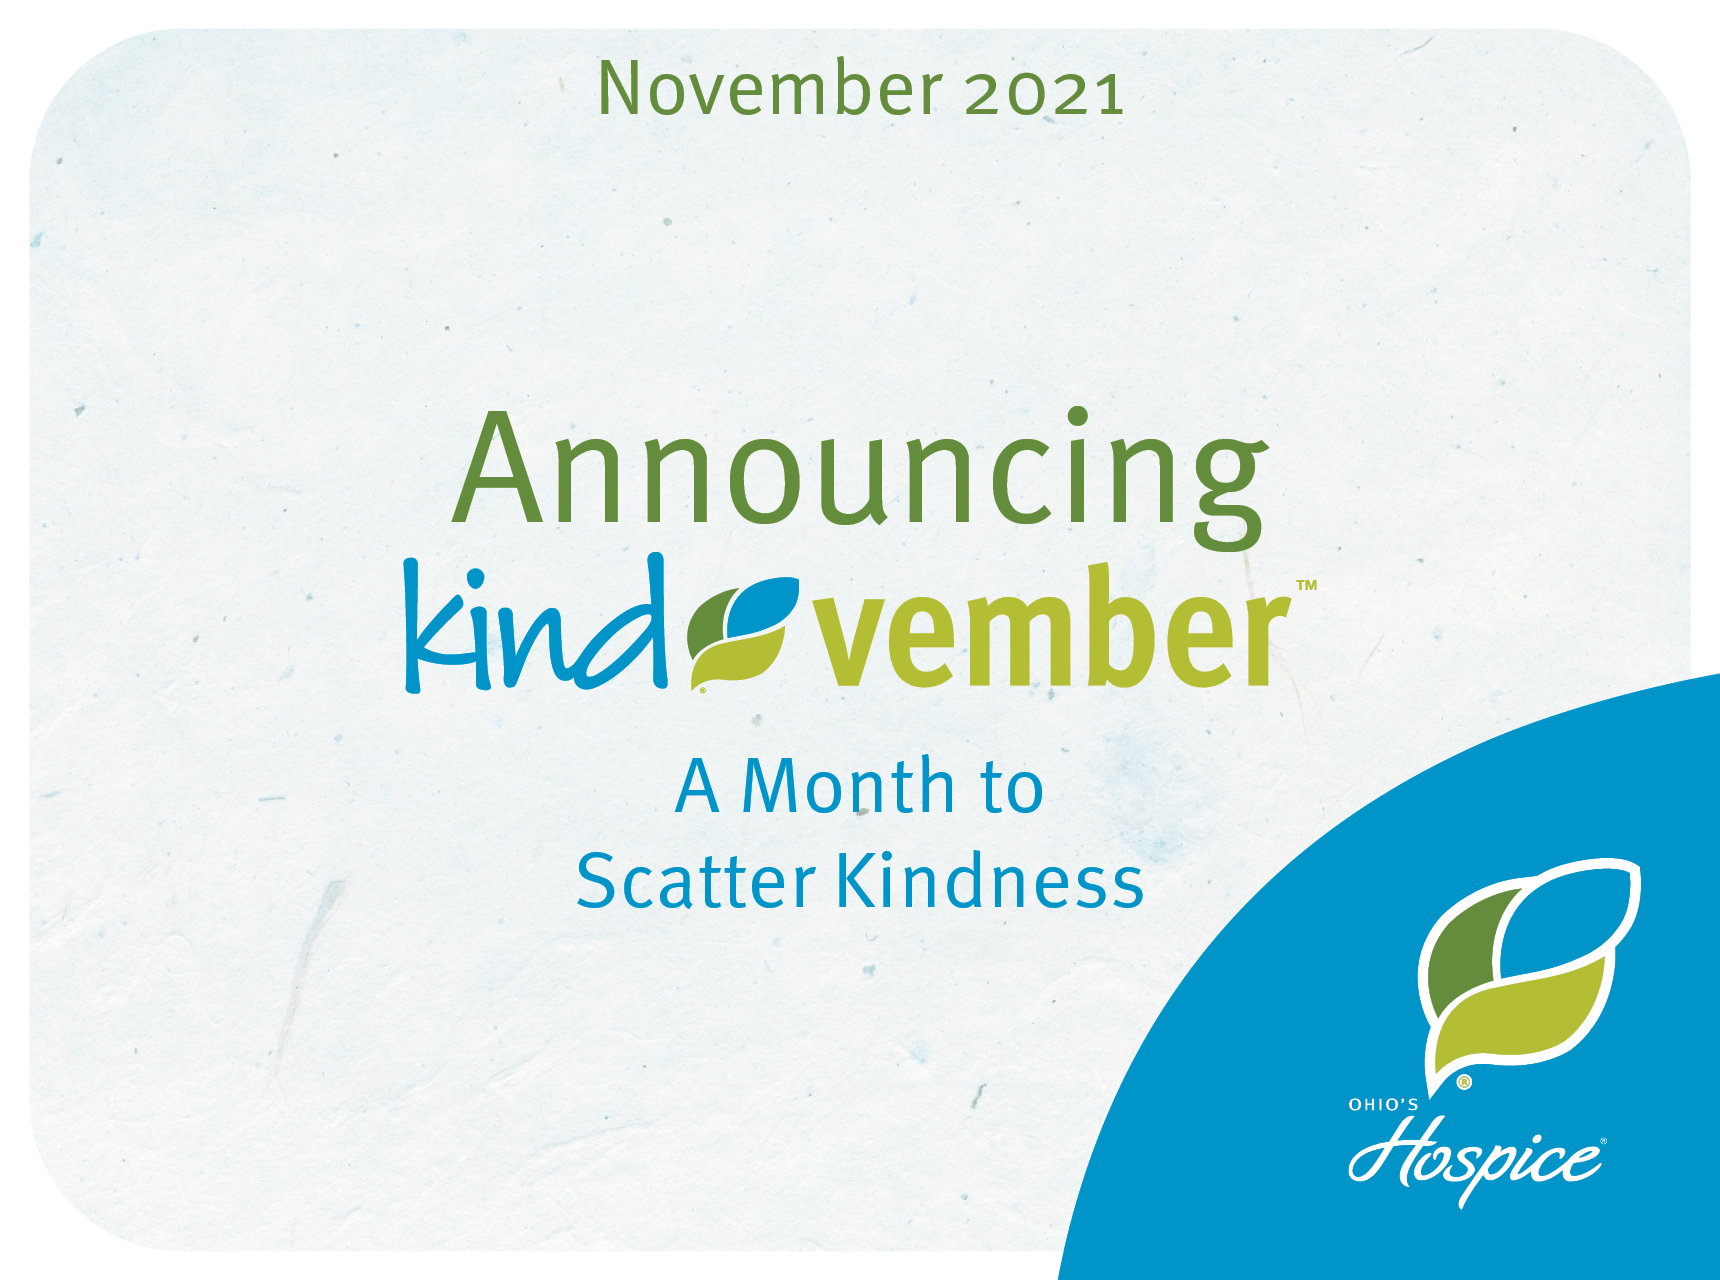 Announcing Kindvember - A month to Scatter Kindness - Ohio's Hospice